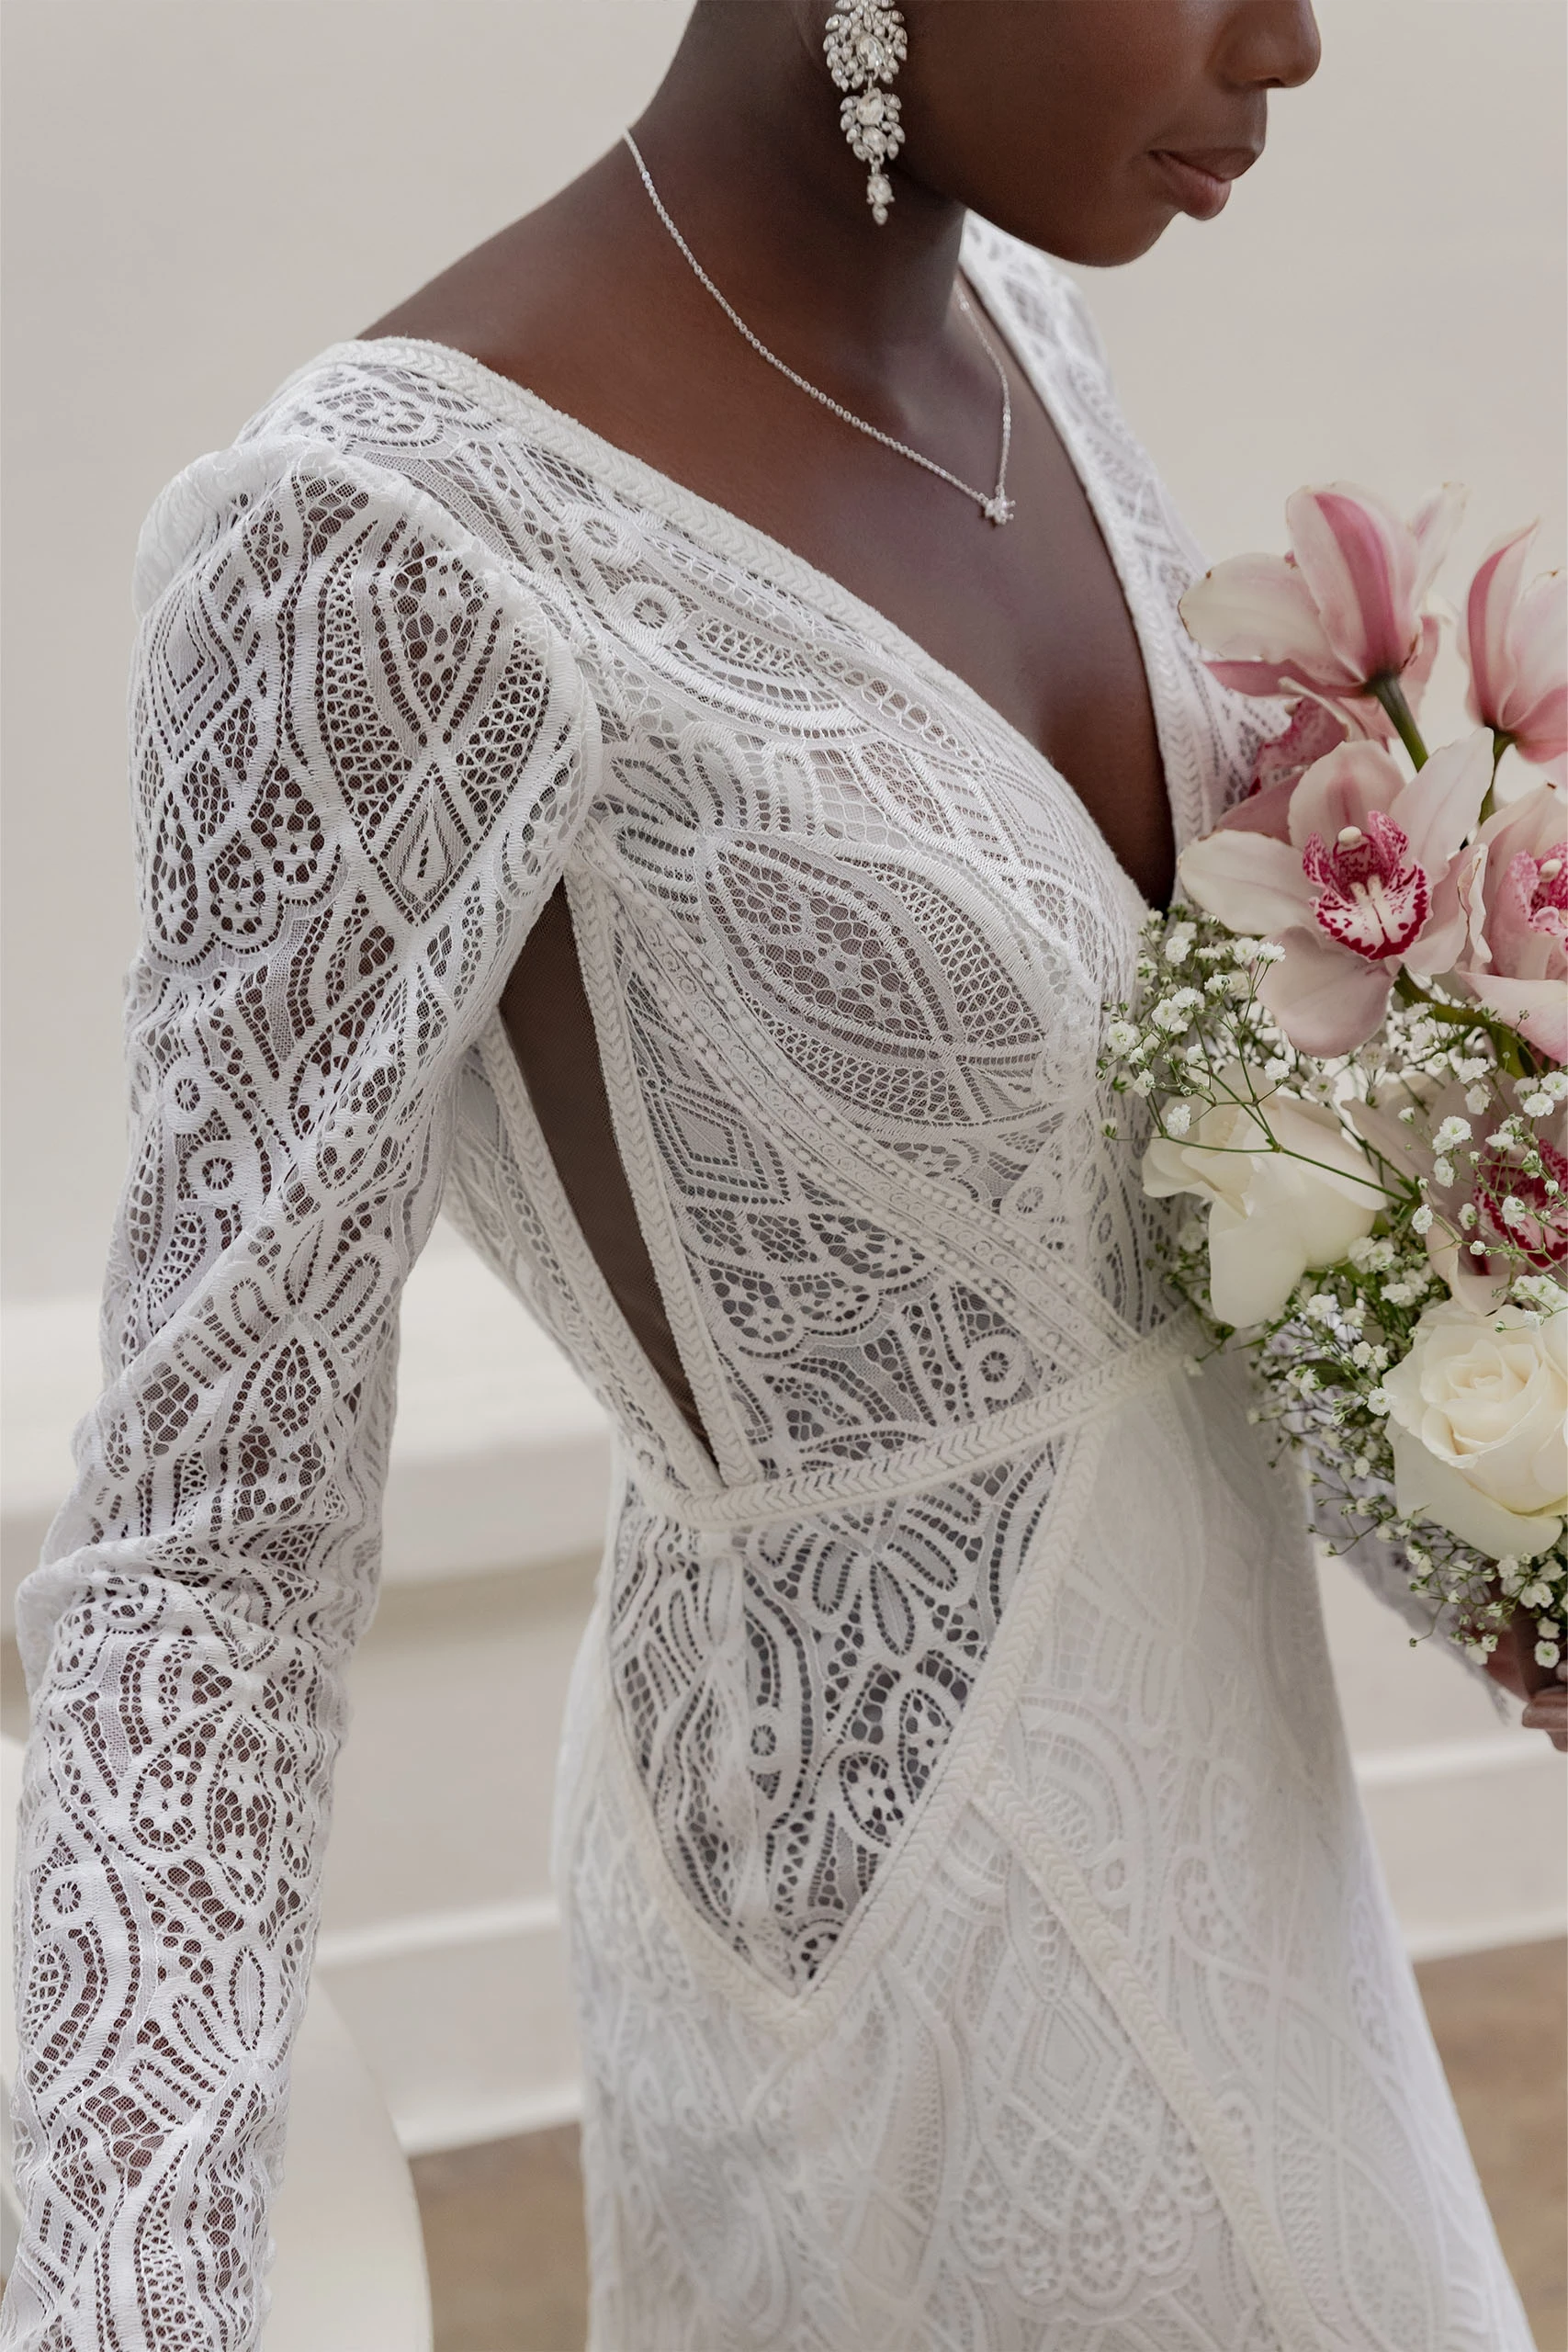 lace sheath wedding dress with cutouts and long sleeves - 7742 by Stella York